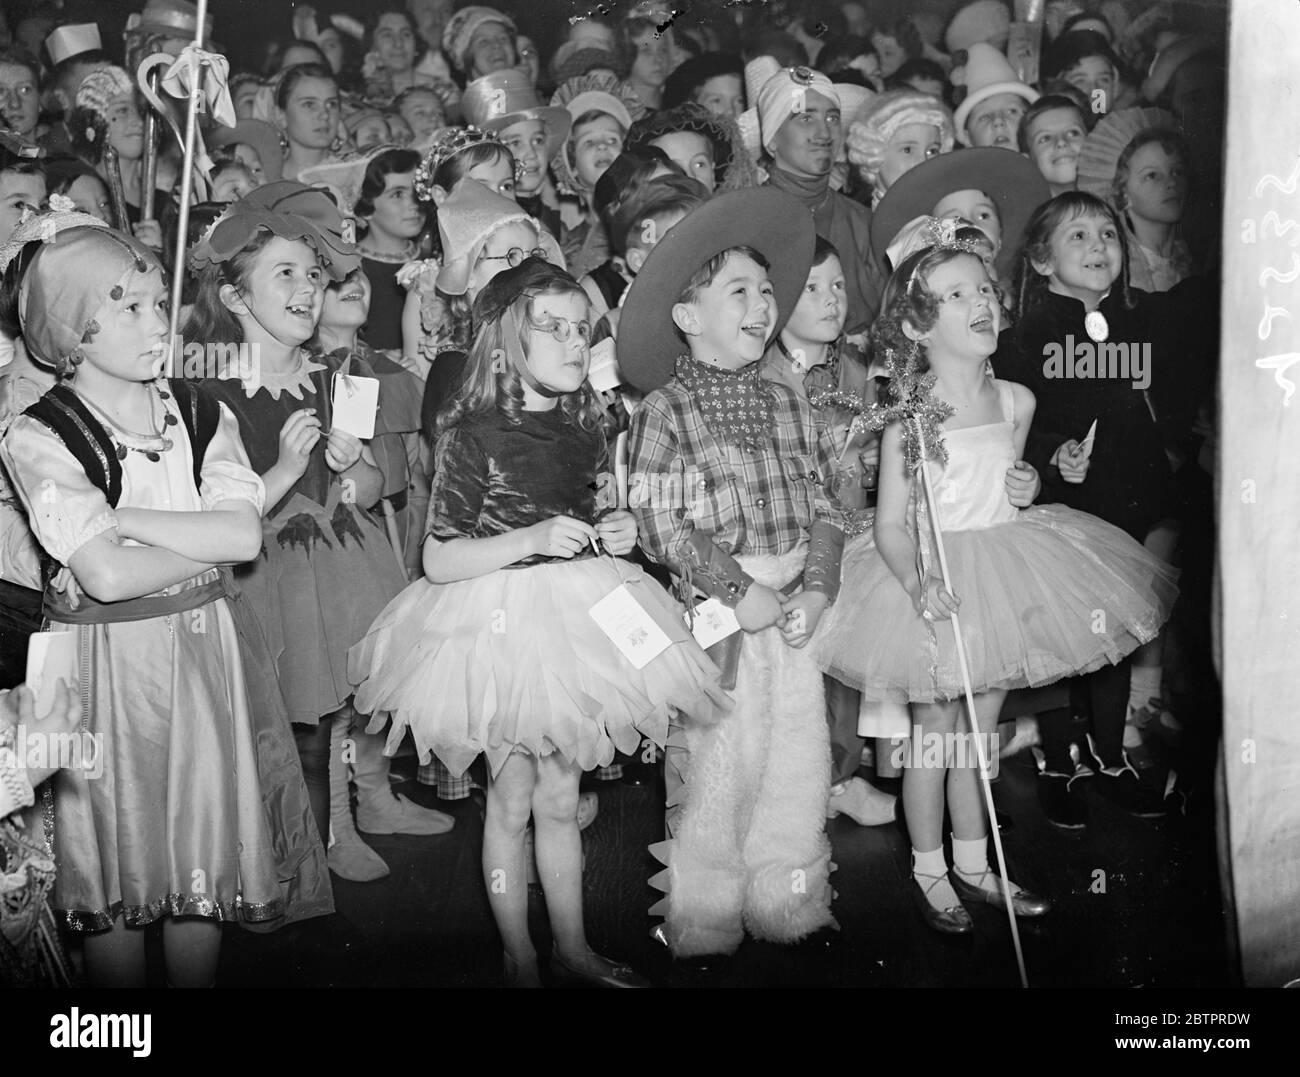 Real cowboy guffaw. A small cowboy and is fellow guests in fancy dress let themselves go in a burst of laughter at the Punch and Judy Show at the Lord Mayor's Ball for children at the Mansion House, London. 6 January 1938 Stock Photo